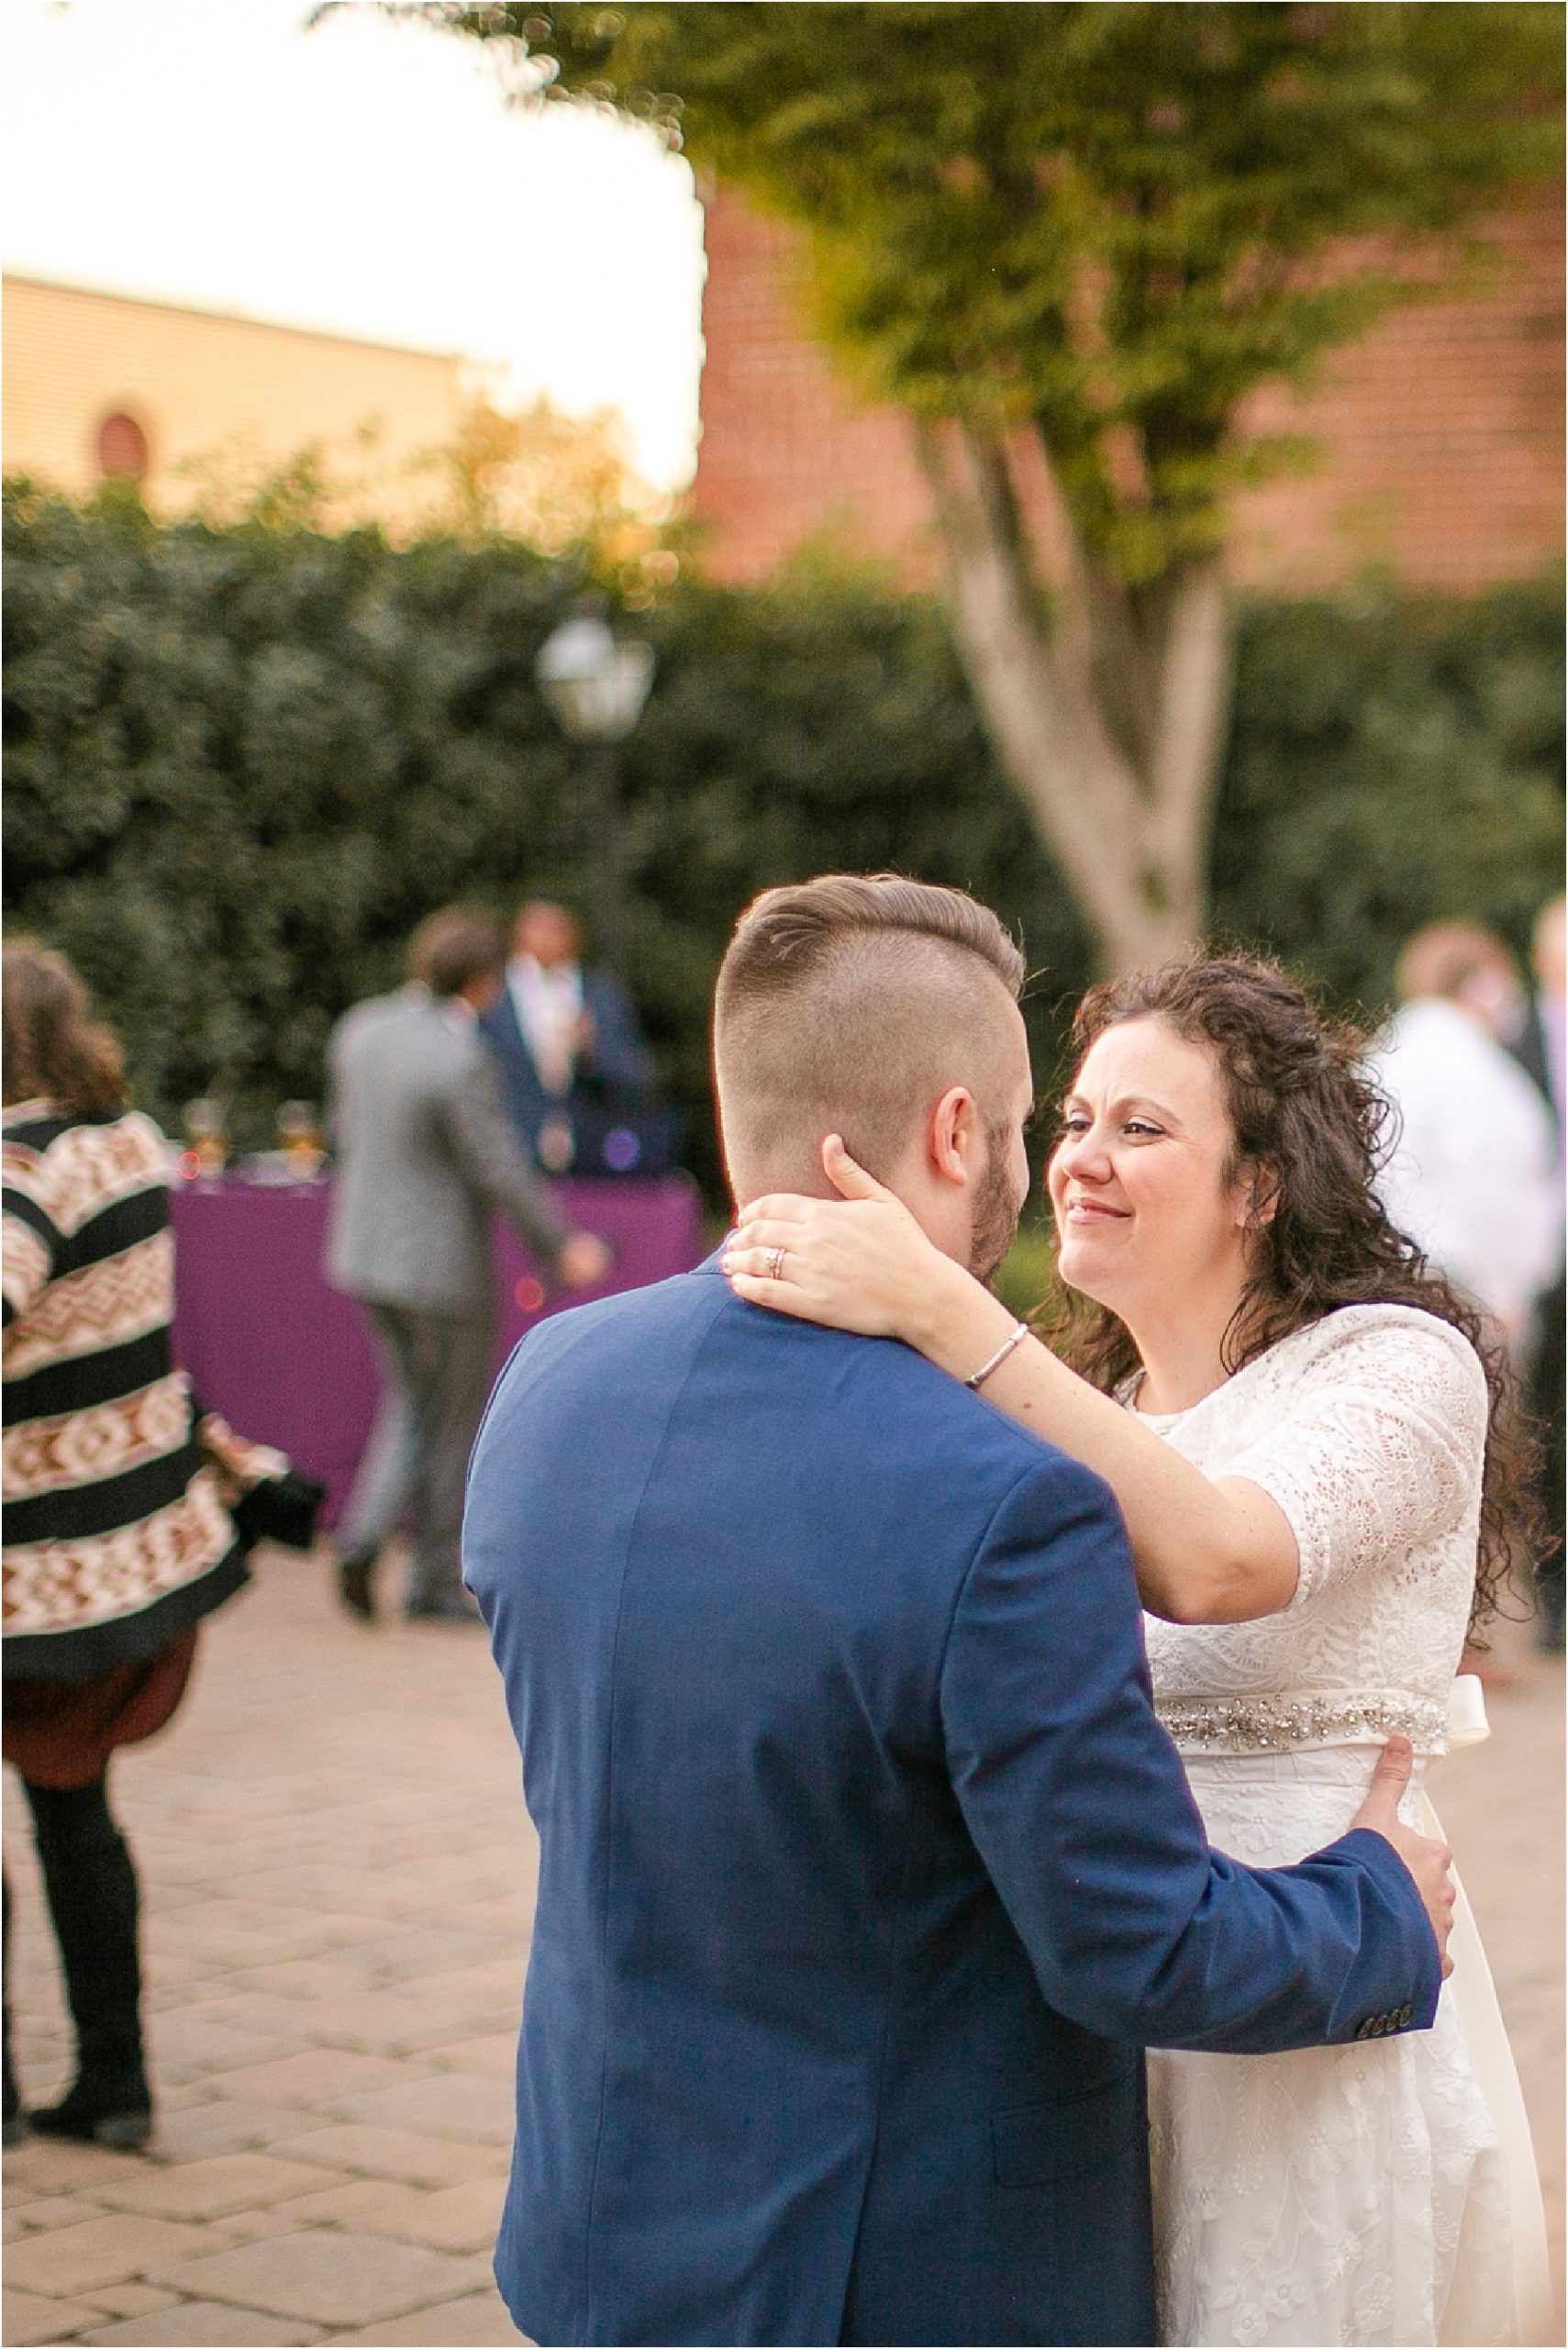 Groom dancing with his bride outside of Bleckley wedding